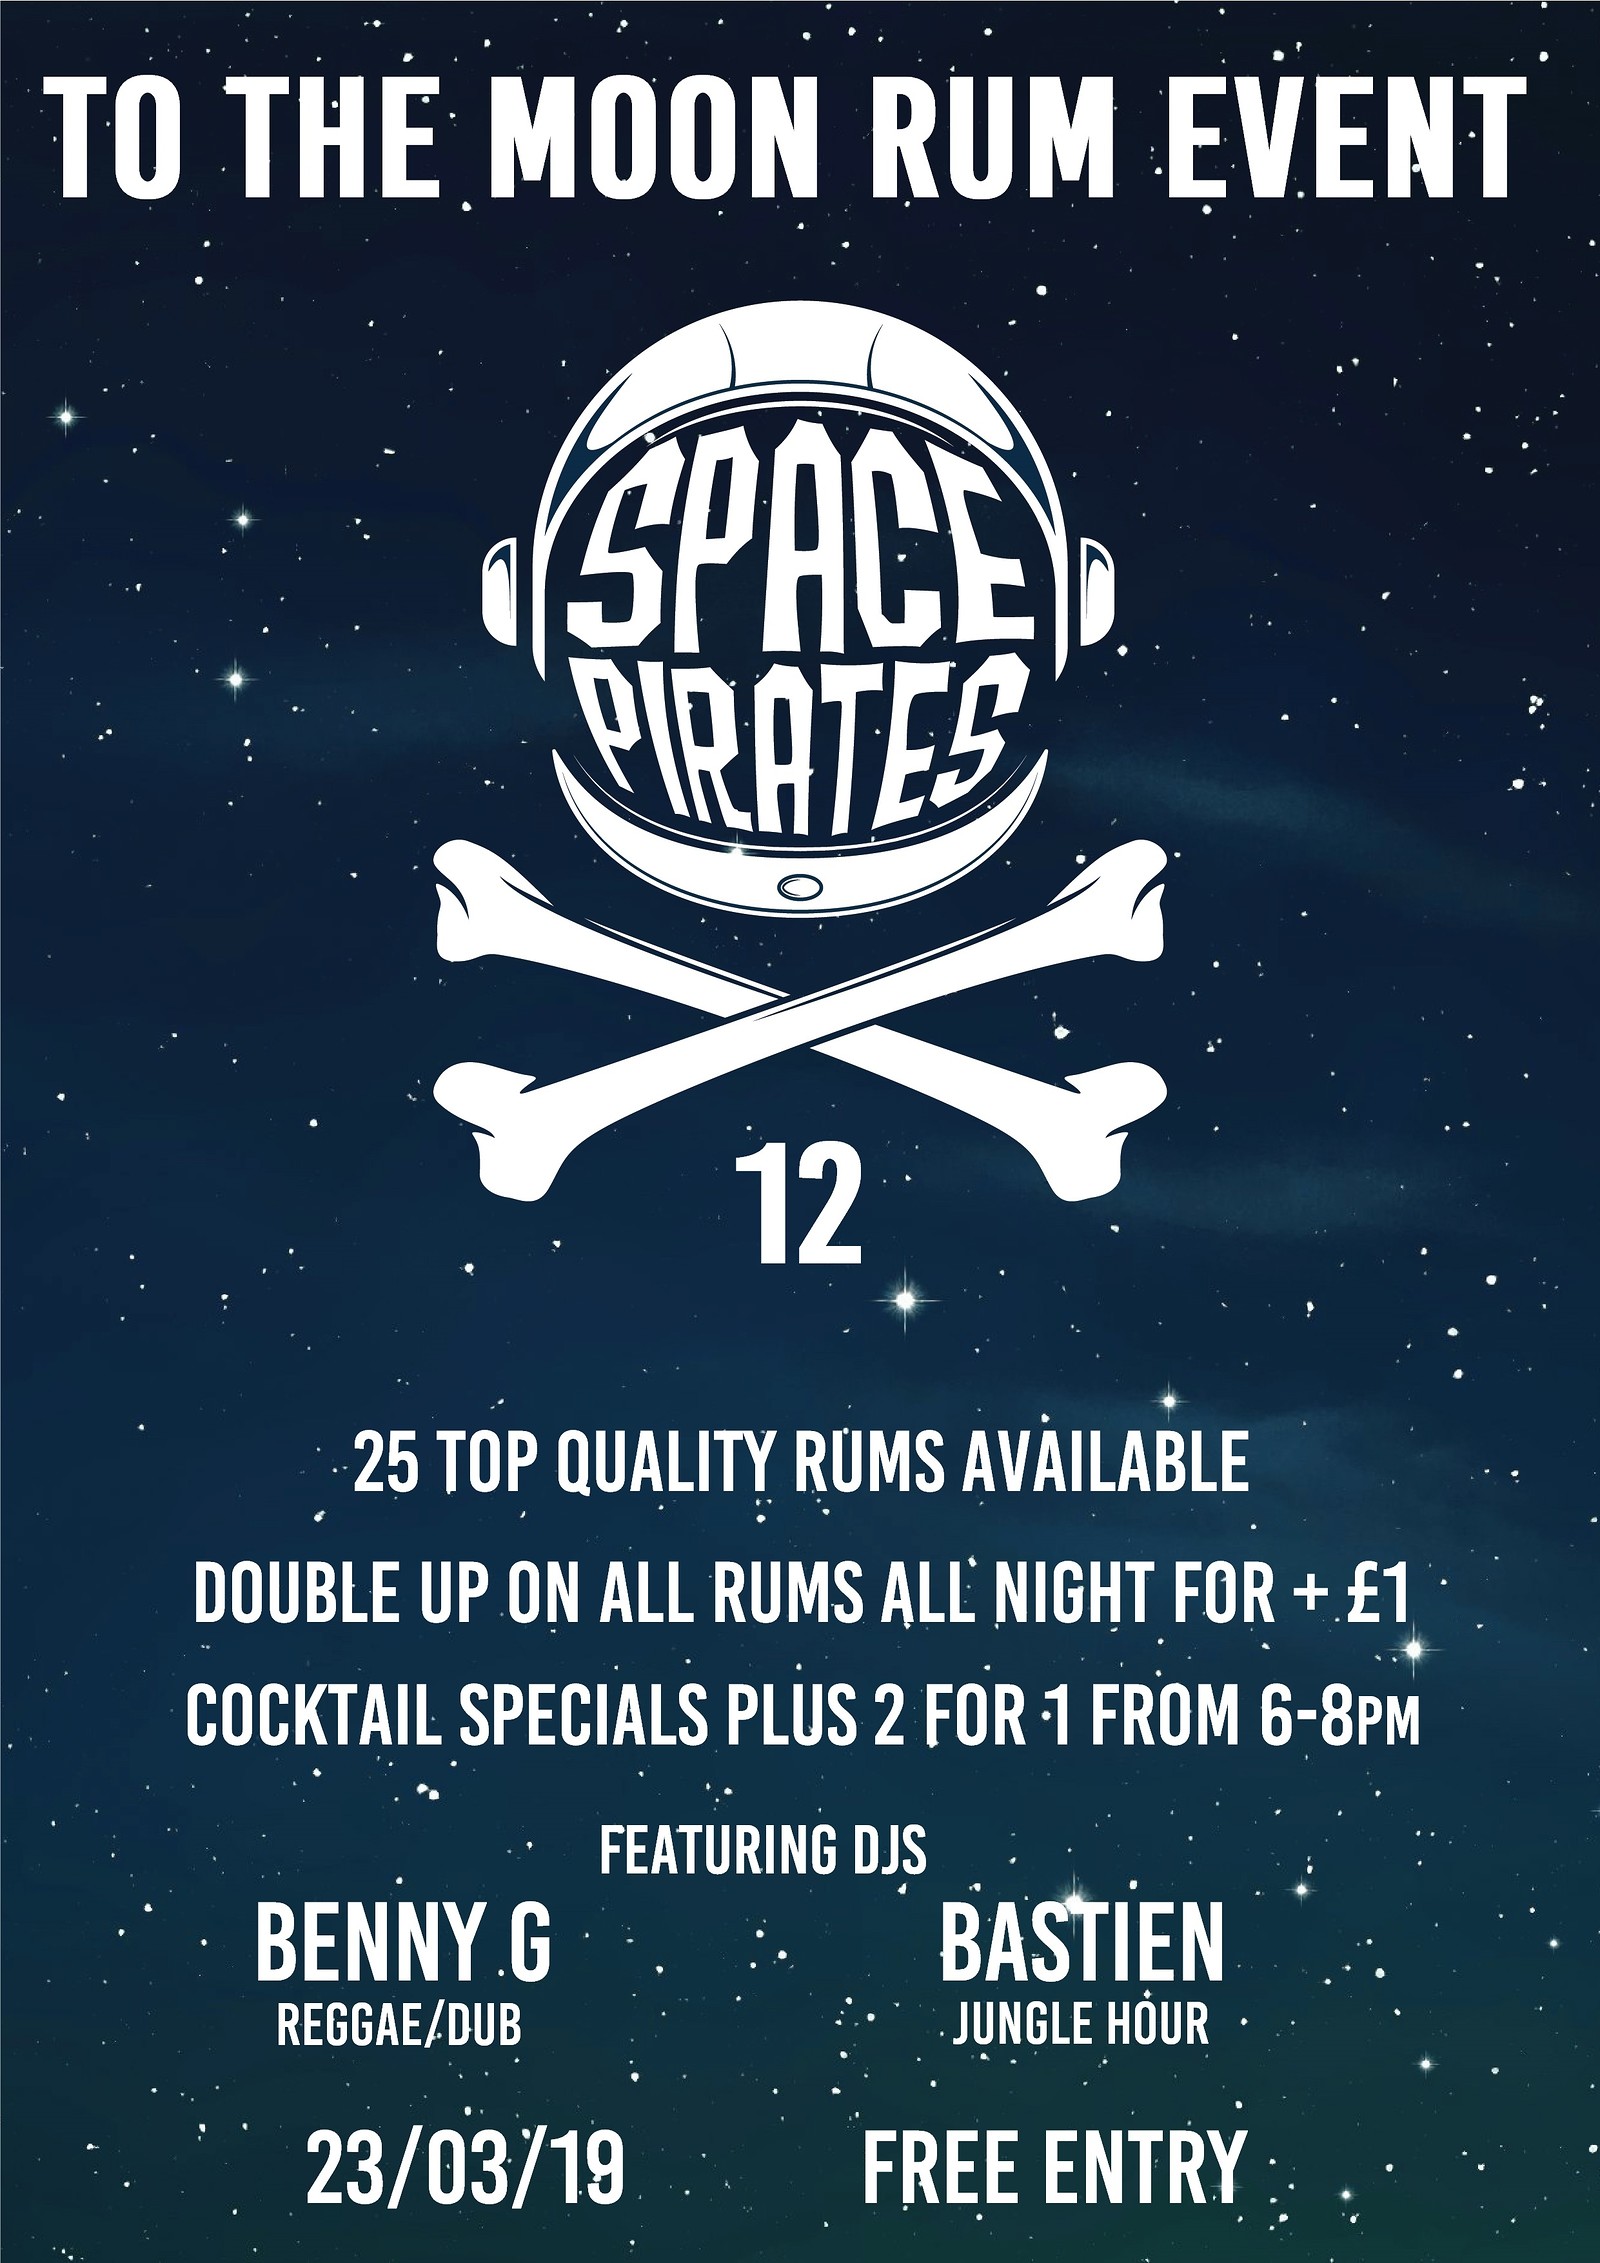 Space Pirates 12 - rum event at To The Moon